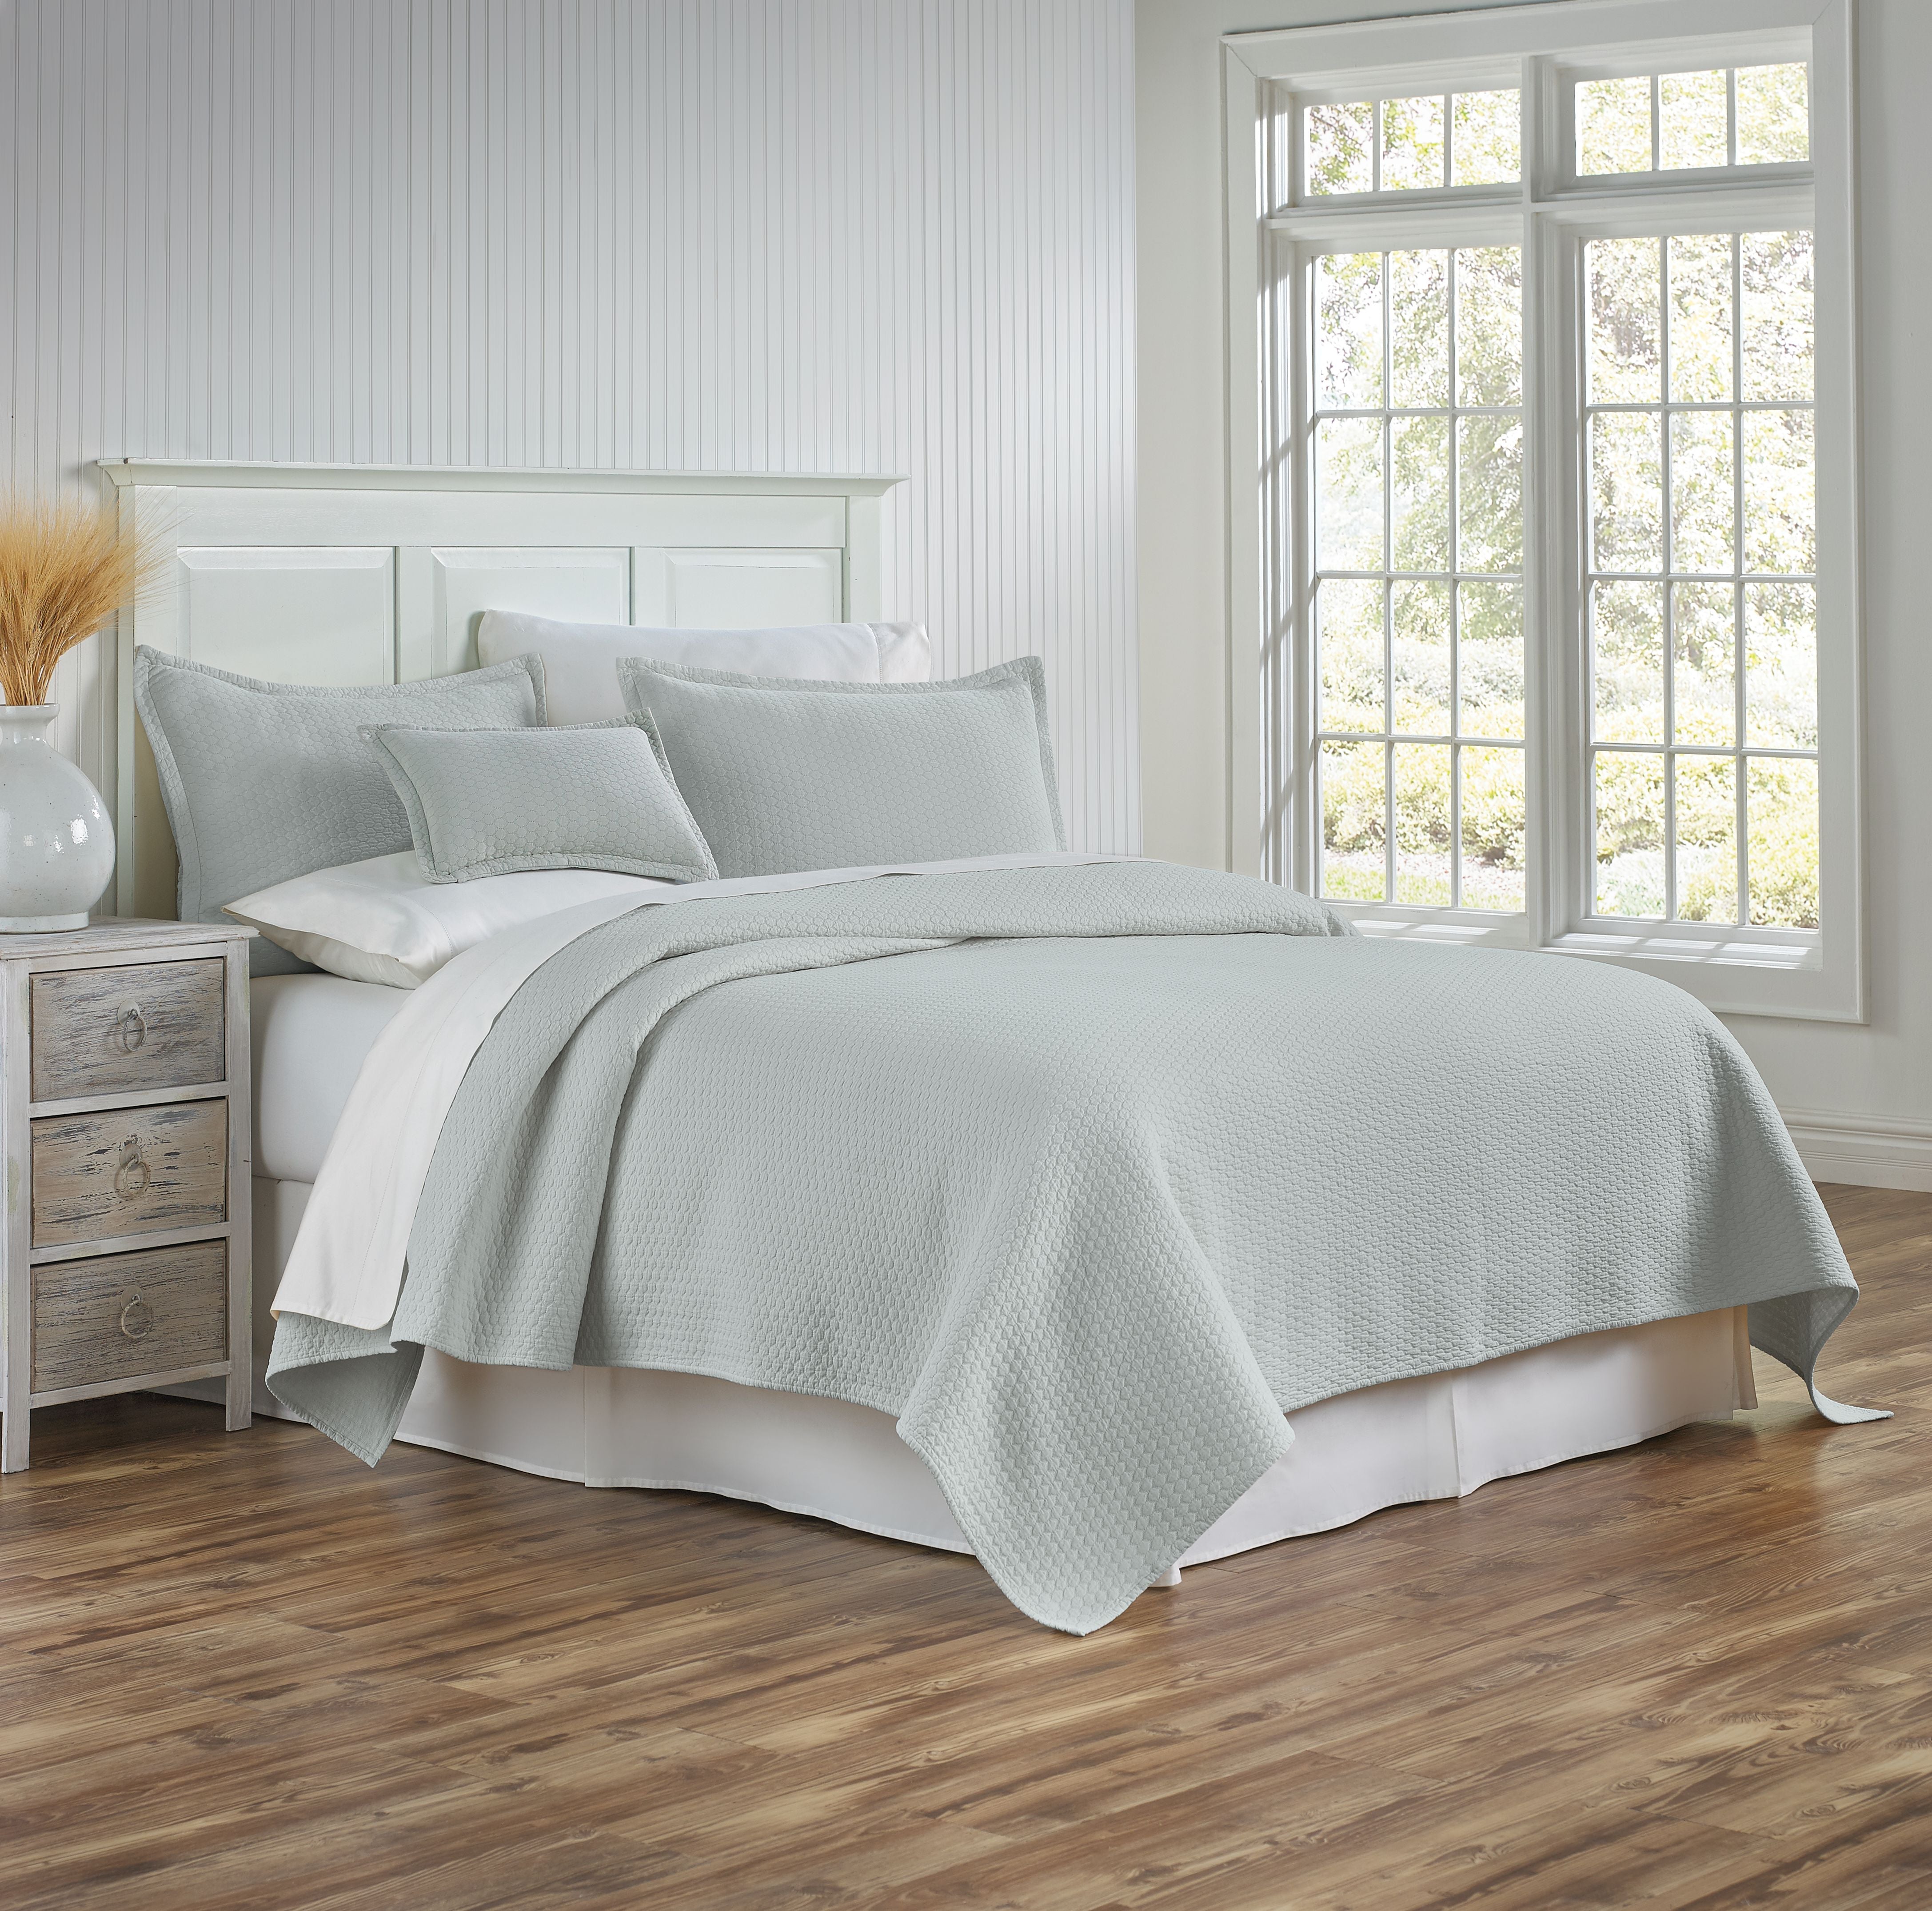 Tracey Full/Queen Coverlet - Sea Glass